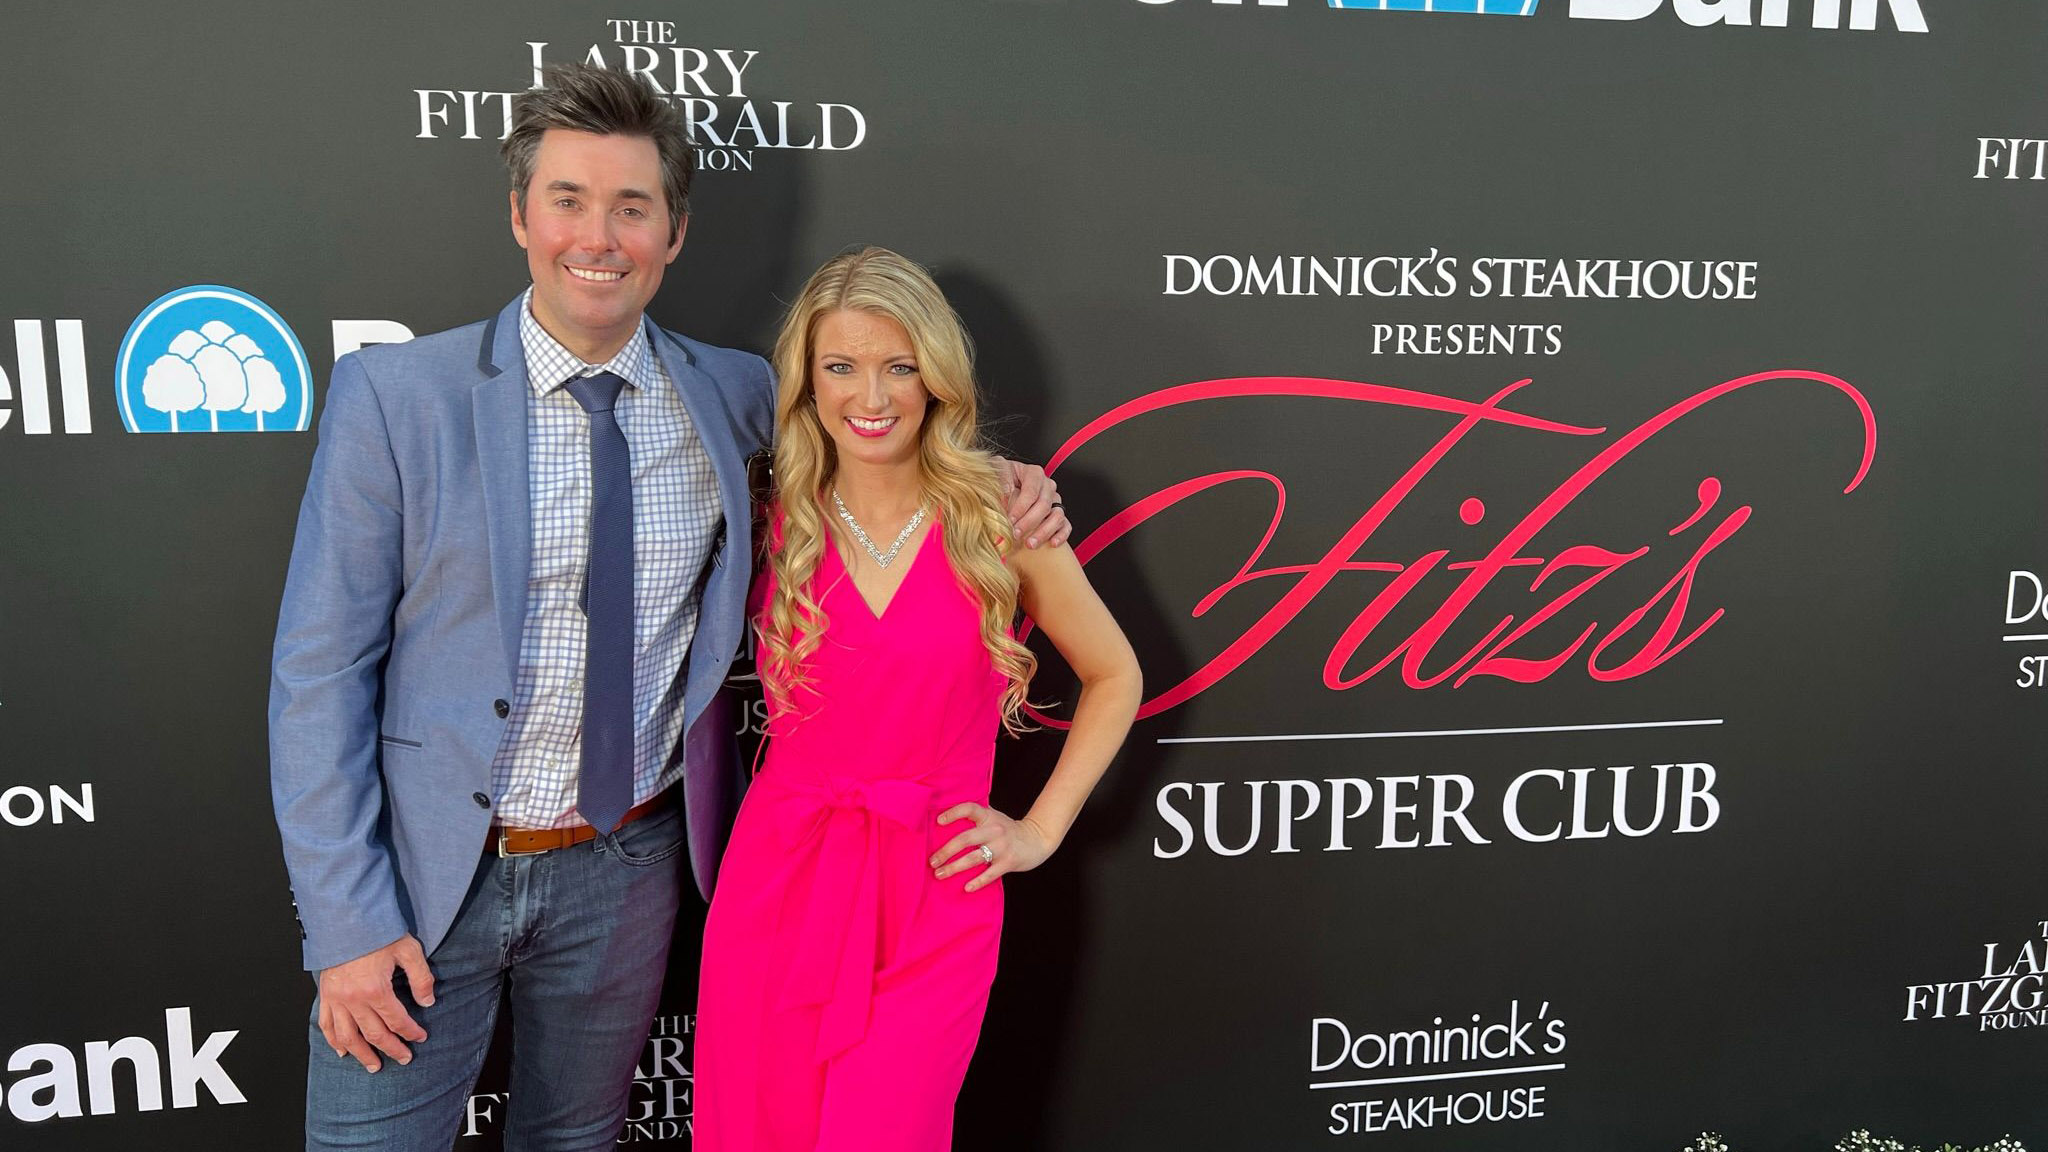 Arizona business leaders descend on Dominick's Steakhouse in support of the Larry  Fitzgerald Foundation - Arizona Digital Free Press